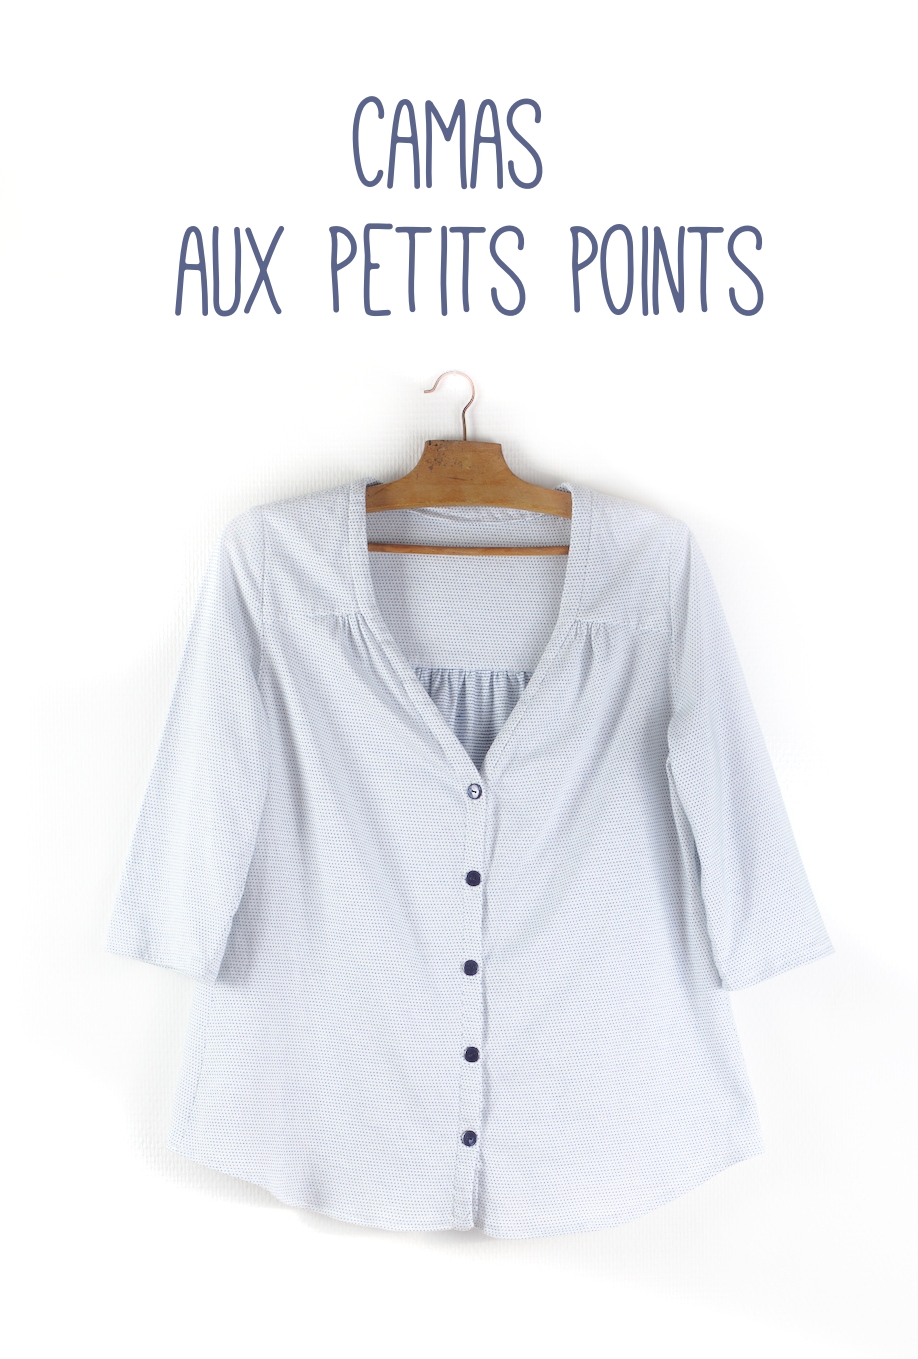 blouse-camas-aux-petits-points-thread-theory